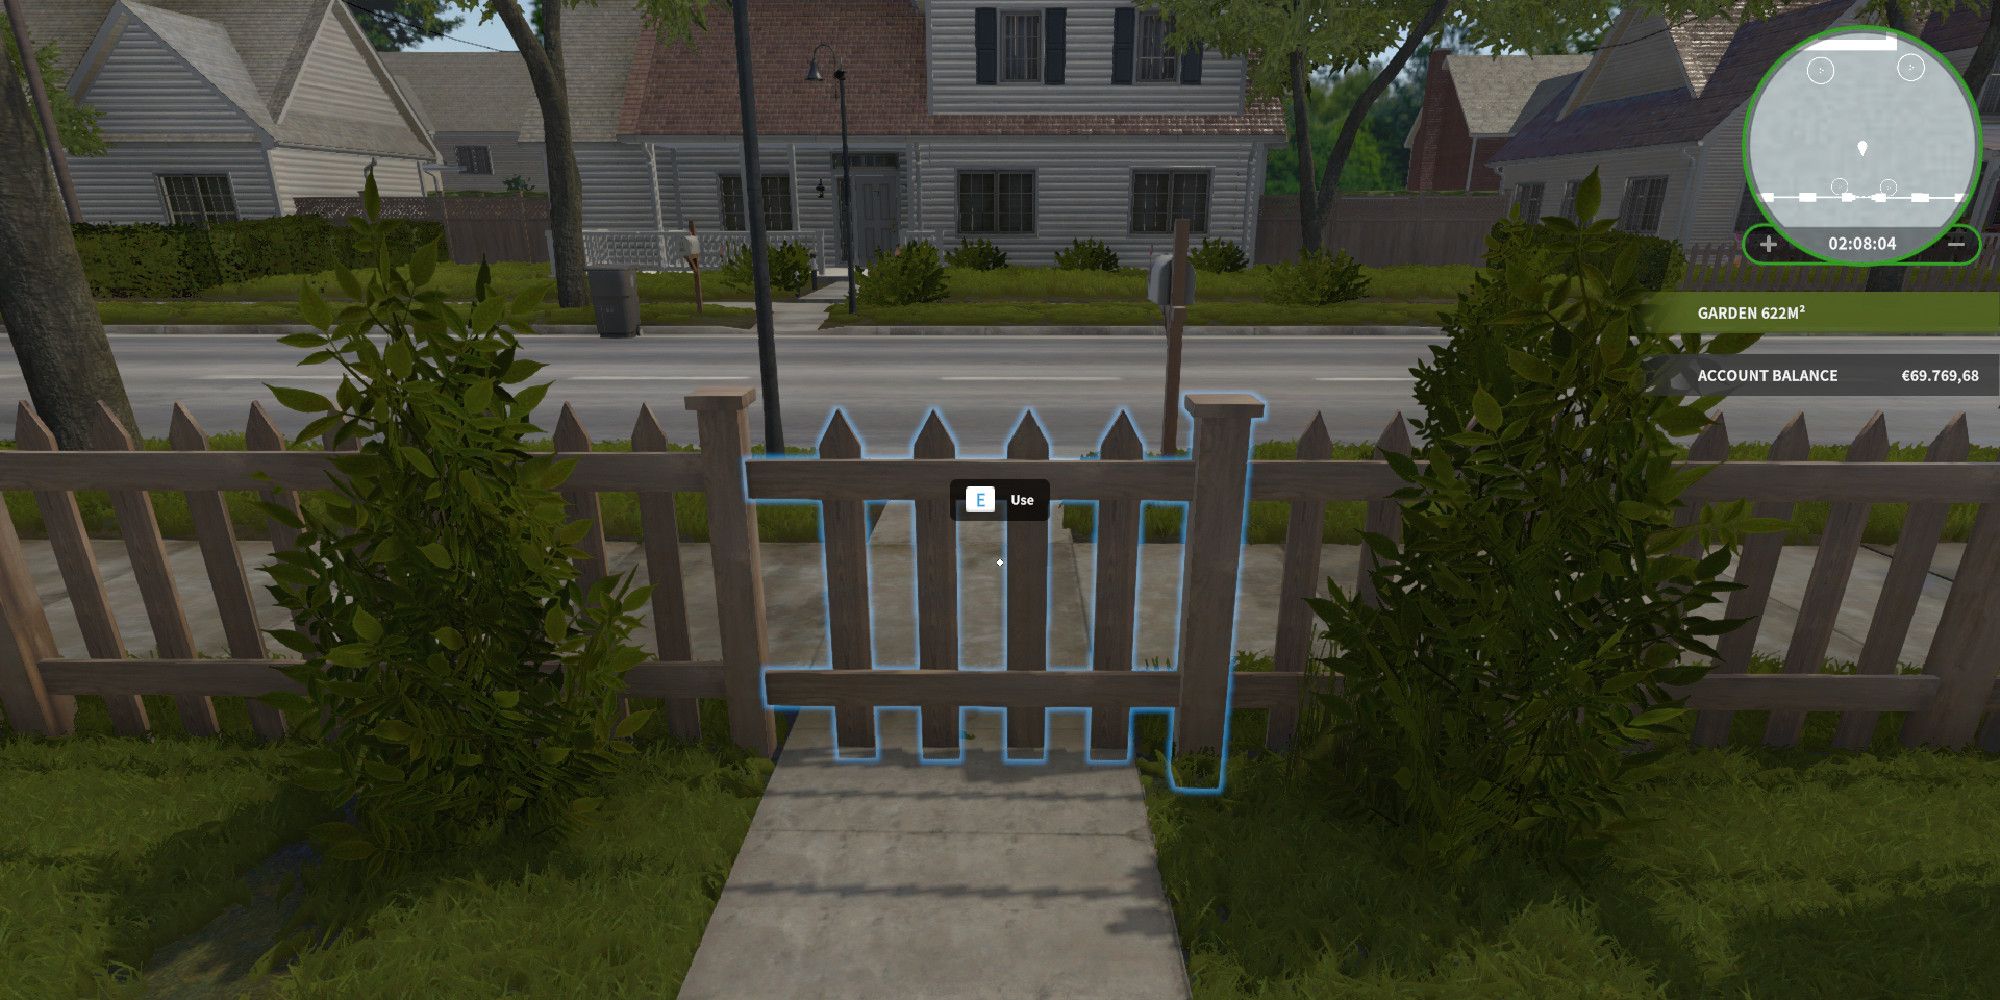 House Flipper using the front gate can let you switch jobs without a penalty